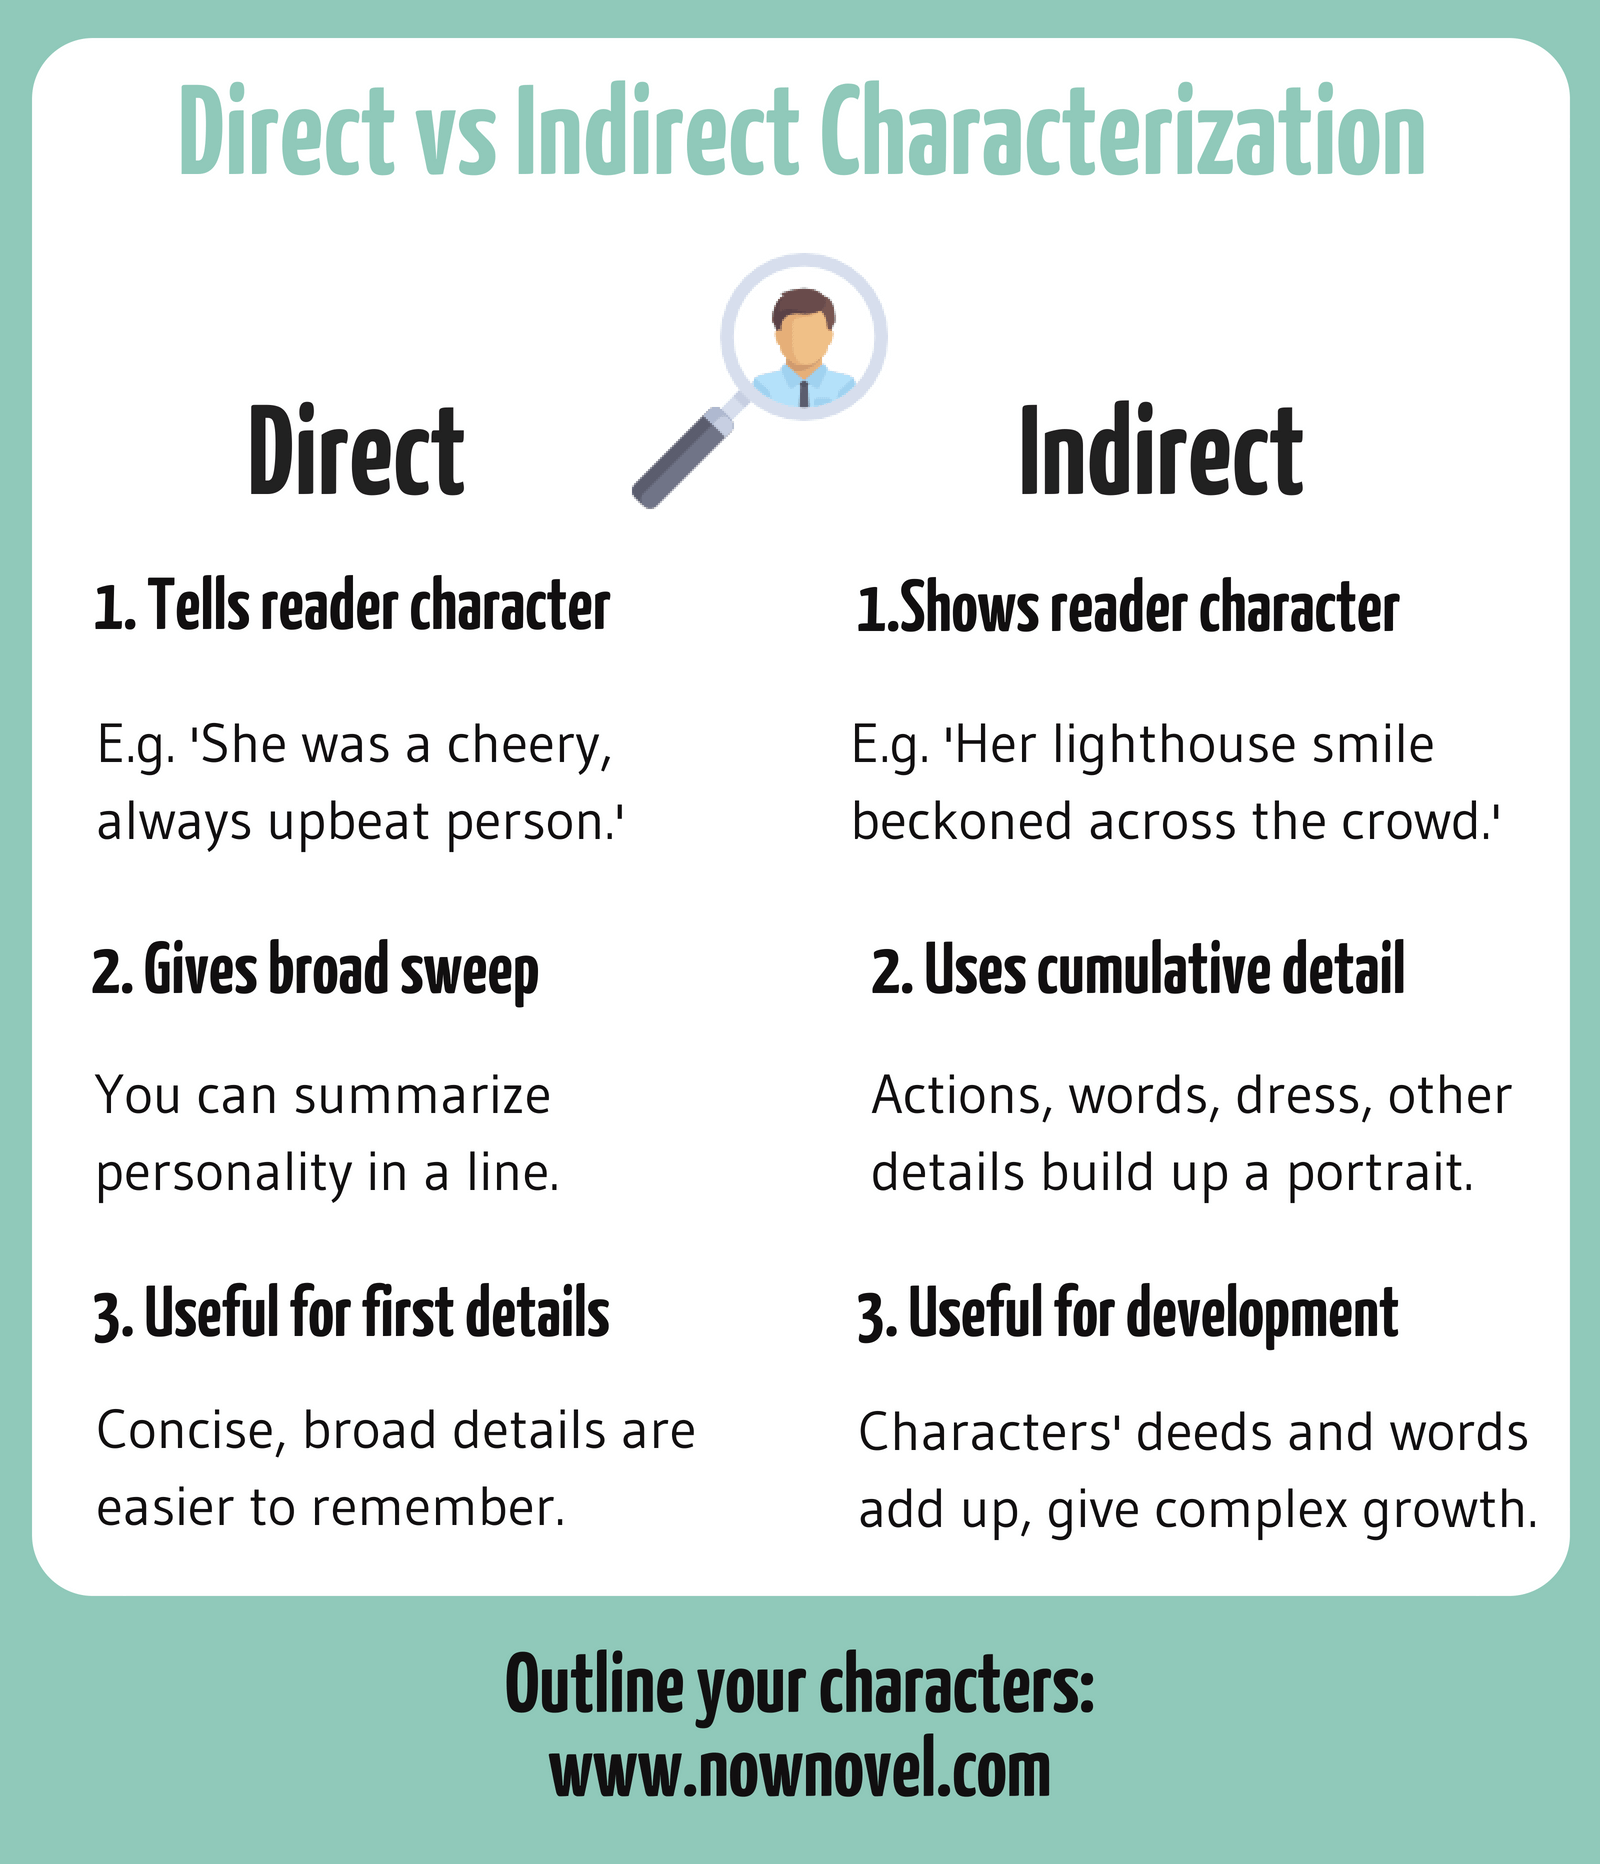 Direct vs indirect characterization - infographic | Now Novel